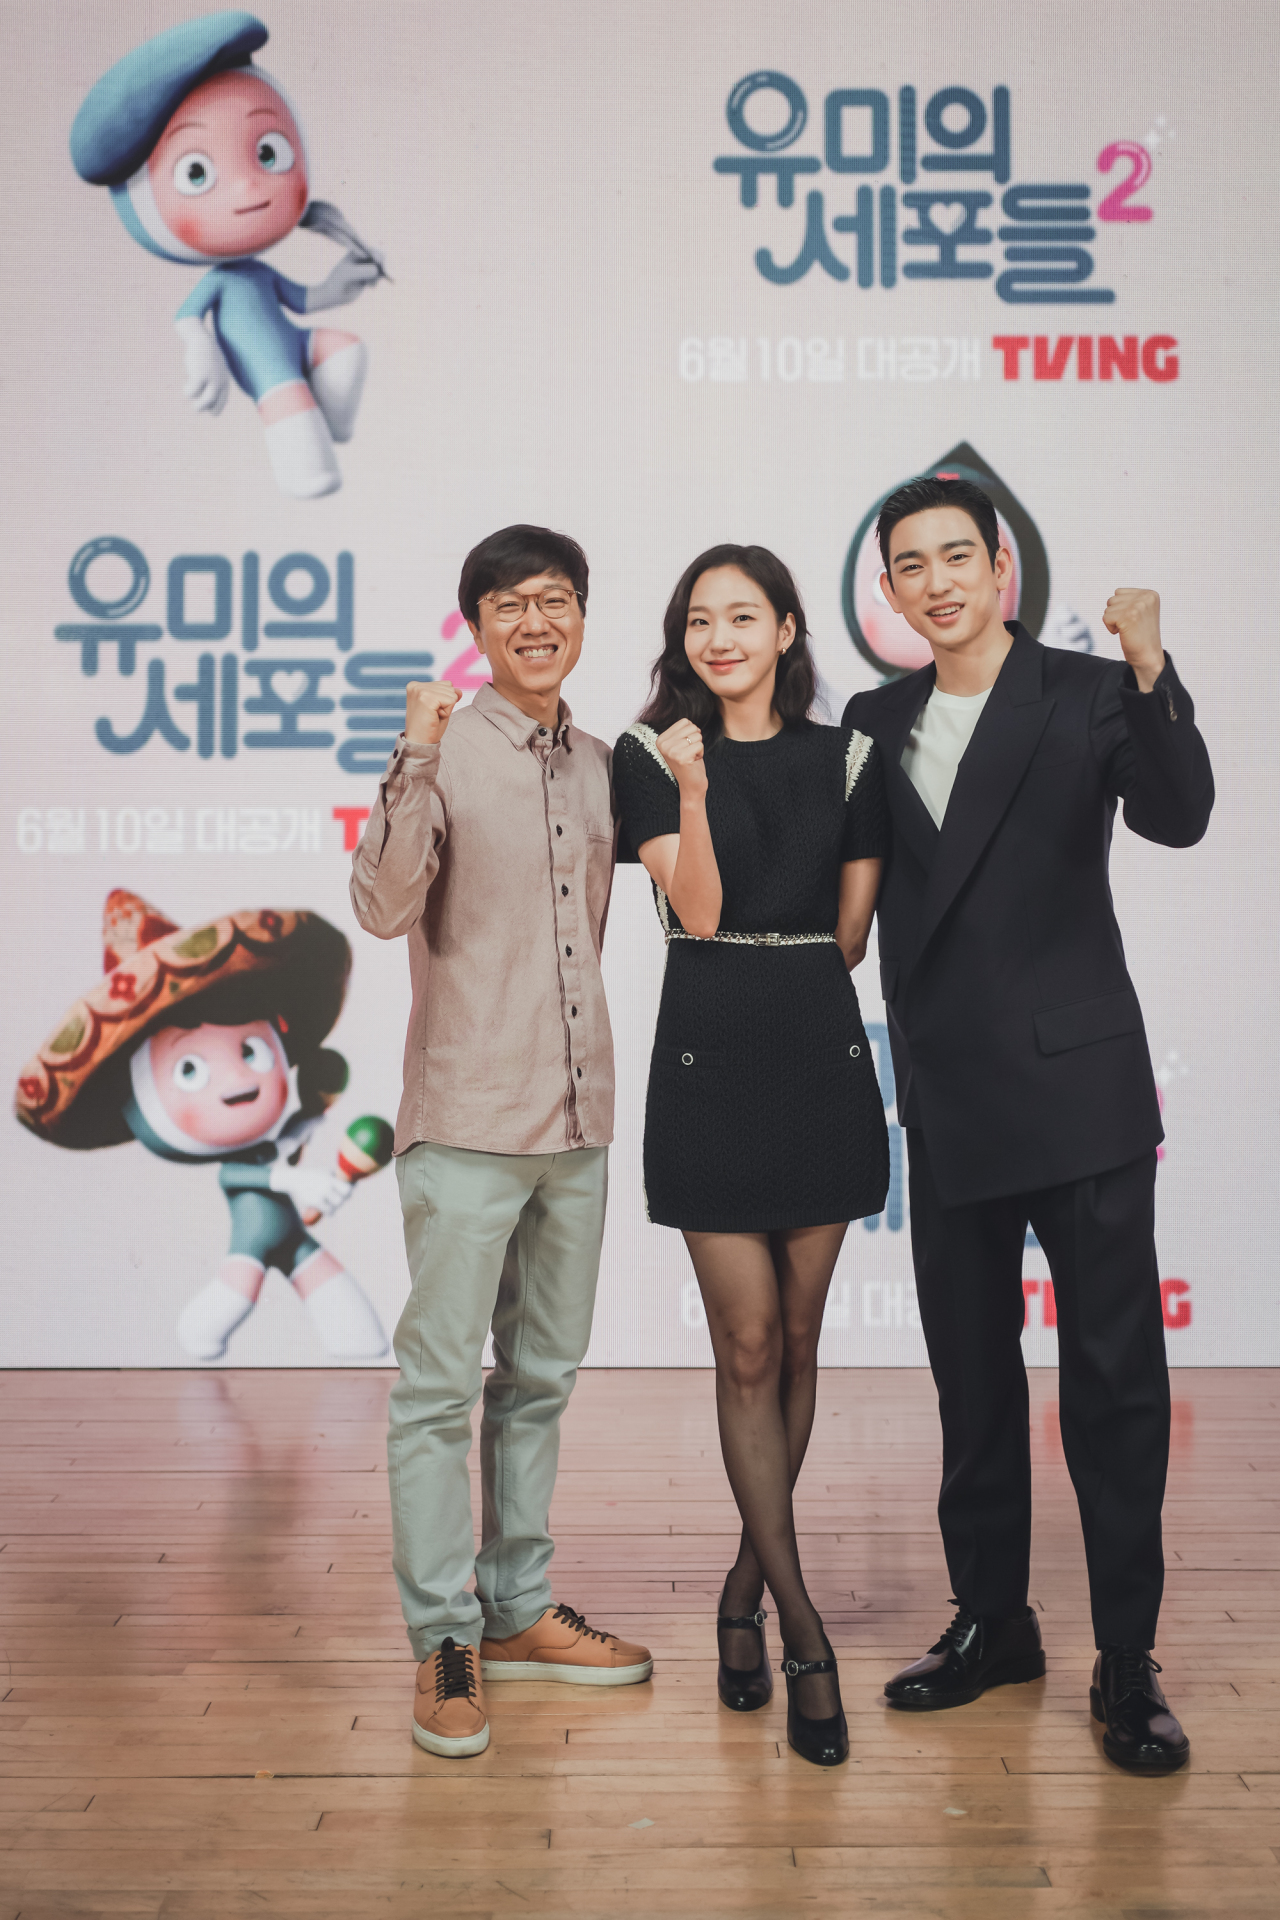 From left: Director Lee Sang-youb and actors Kim Go-eun and Jinyoung of GOT7 pose for photos before an online press conference Tuesday. (Tving)